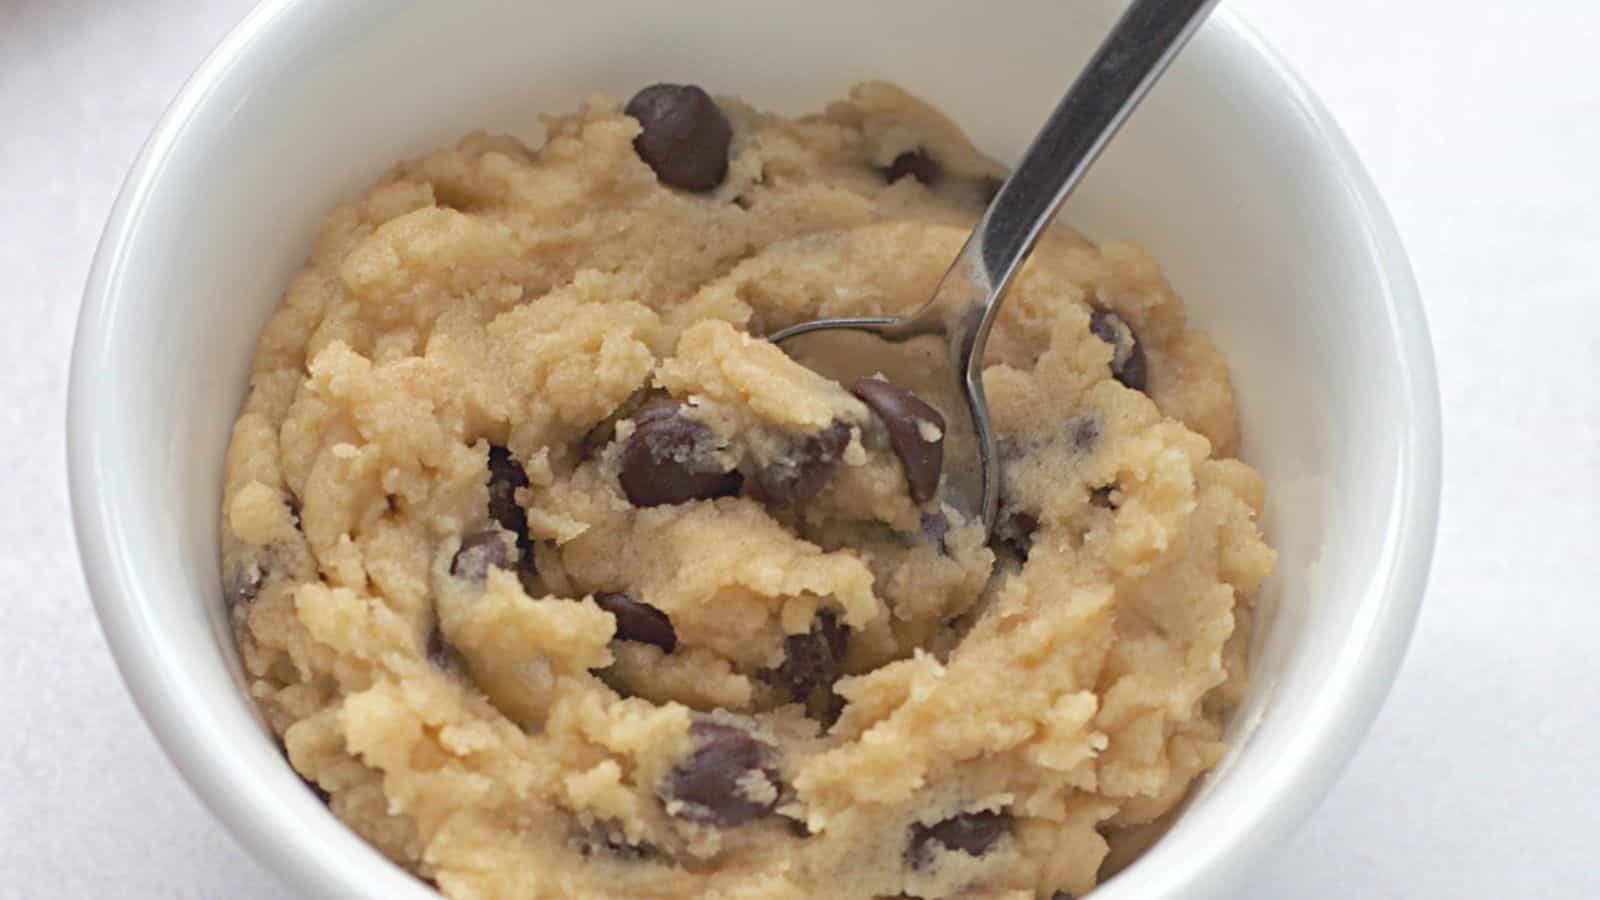 <p>This edible cookie dough is perfect for satisfying your sweet cravings in a single serving. Quick and easy to make, it’s a convenient option for a guilt-free indulgence. With its buttery flavor and chunks of chocolate, it’s a delightful treat that’s sure to please cookie dough lovers of all ages. Whether for a snack or dessert, this edible cookie dough is sure to hit the spot.<br><strong>Get the Recipe: </strong><a href="https://littlebitrecipes.com/single-serving-cookie-dough/?utm_source=msn&utm_medium=page&utm_campaign=msn">Edible Single Serving Cookie Dough</a></p>